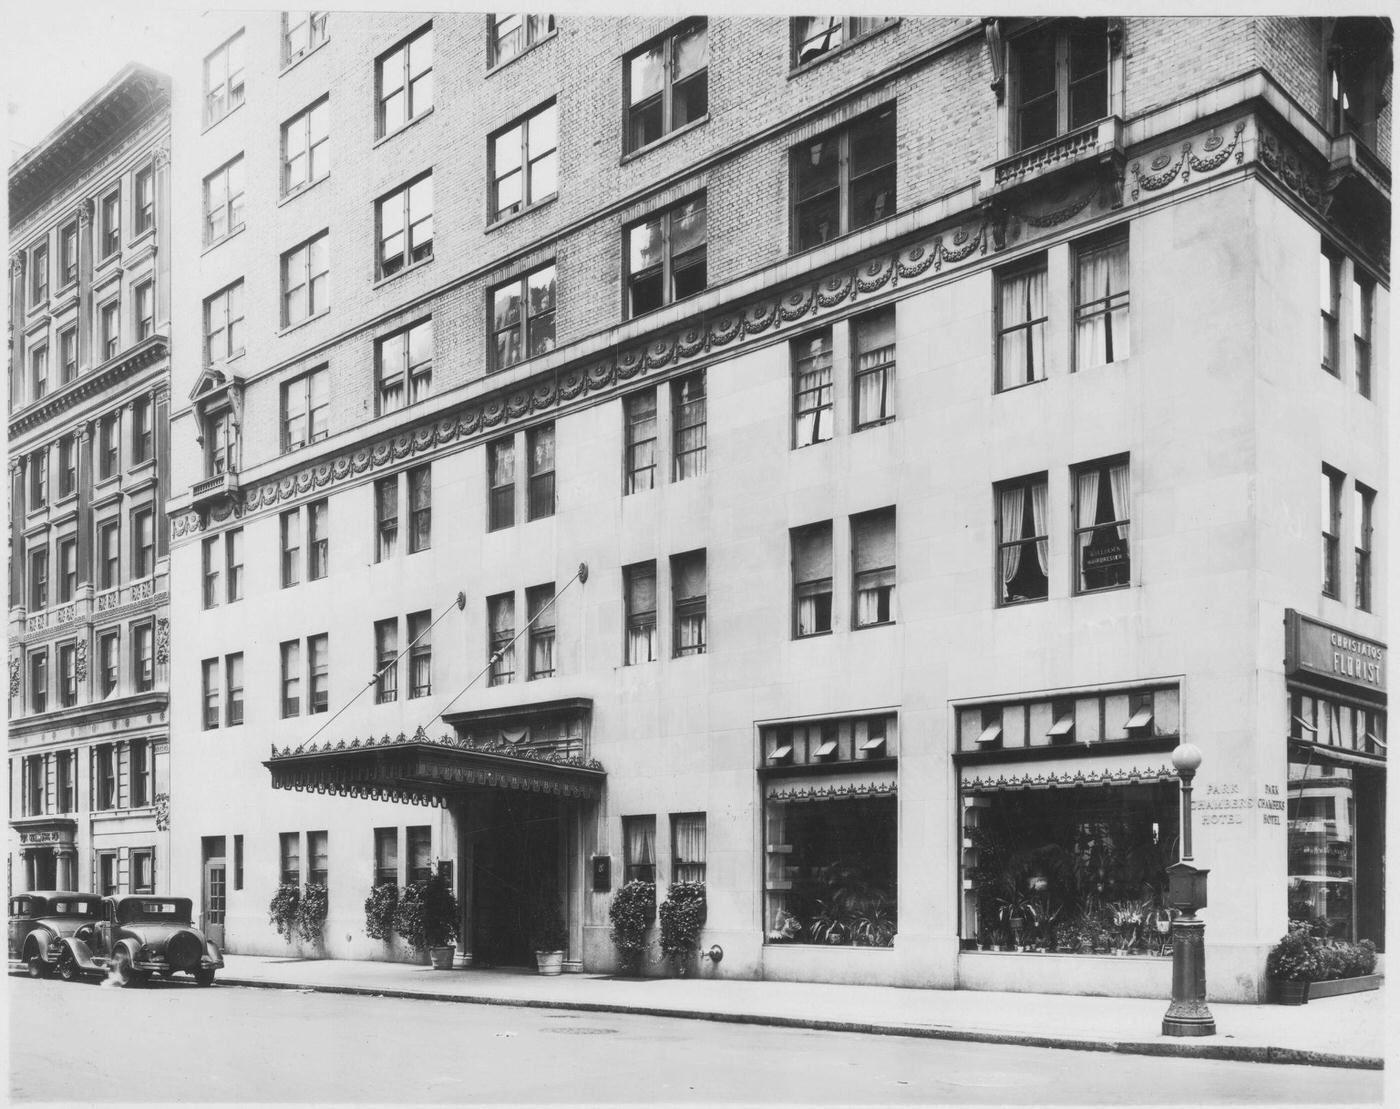 Park Chambers Hotel, 58Th Street And 6Th Avenue, New York City, 1929.